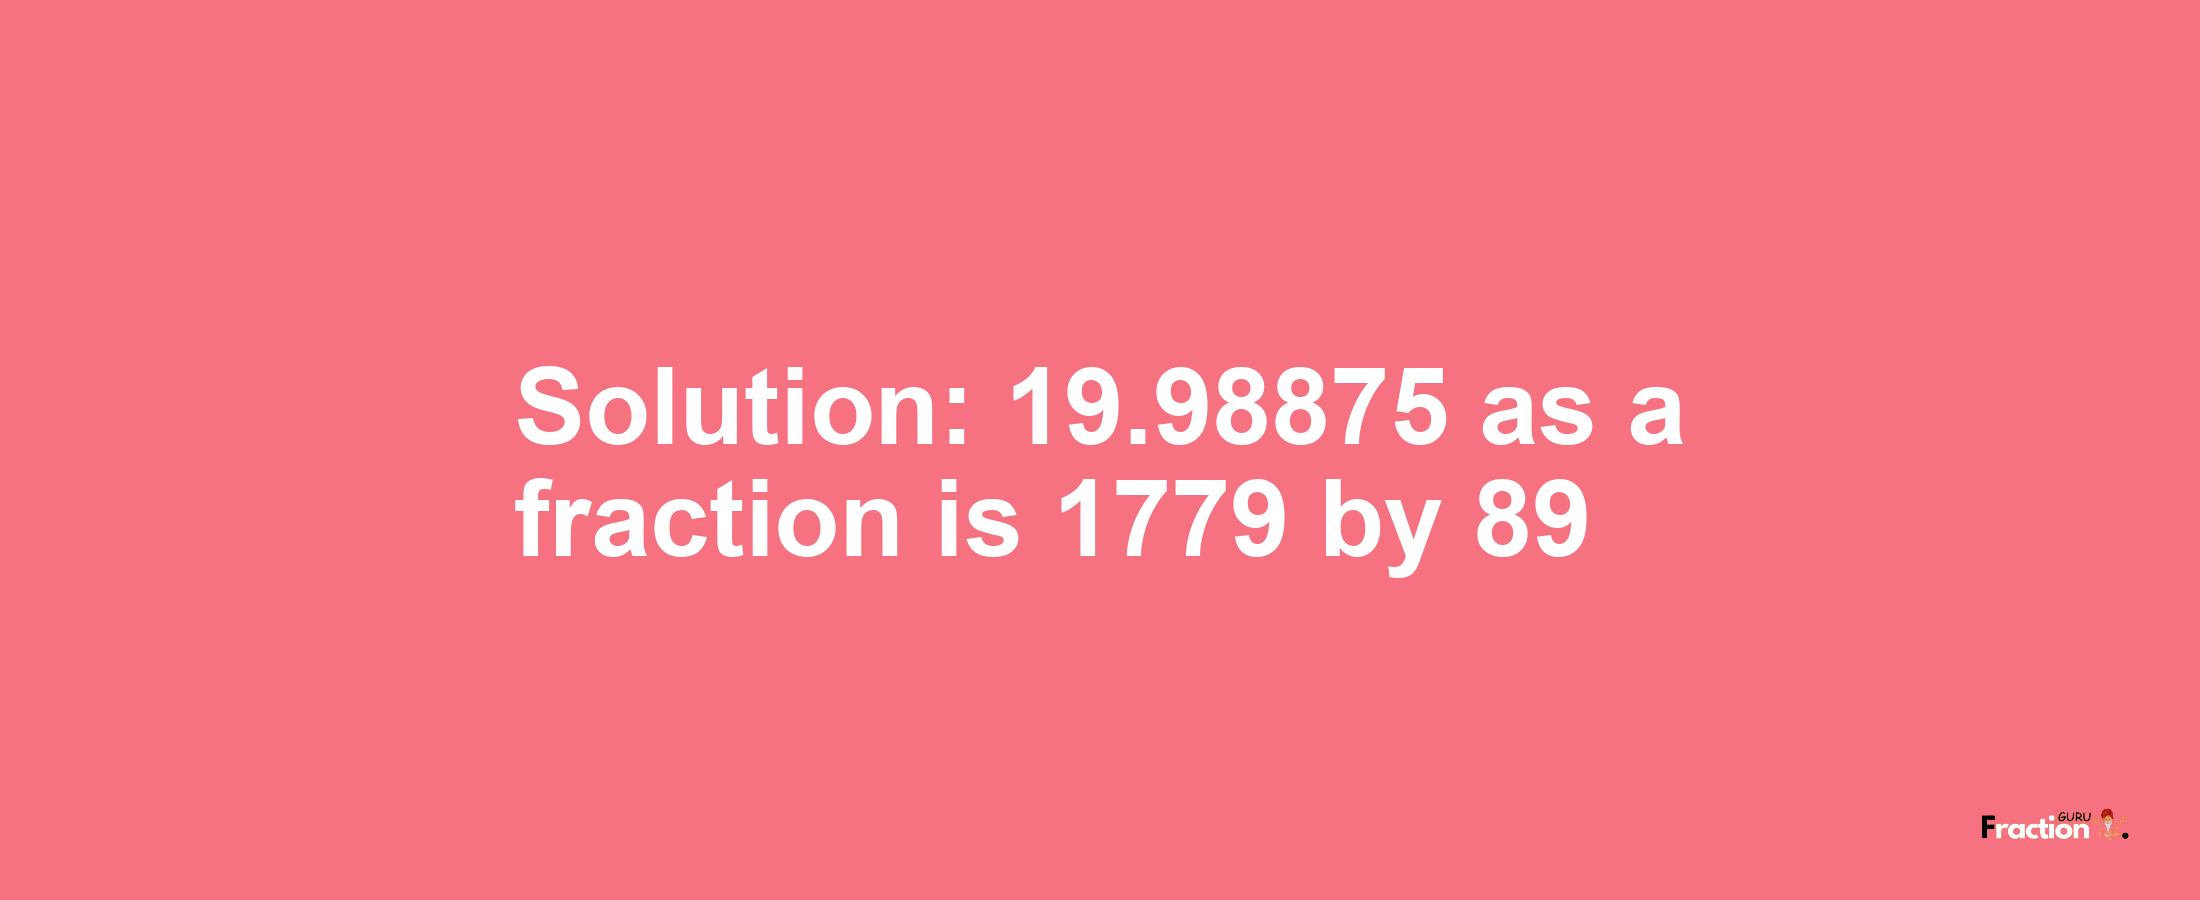 Solution:19.98875 as a fraction is 1779/89